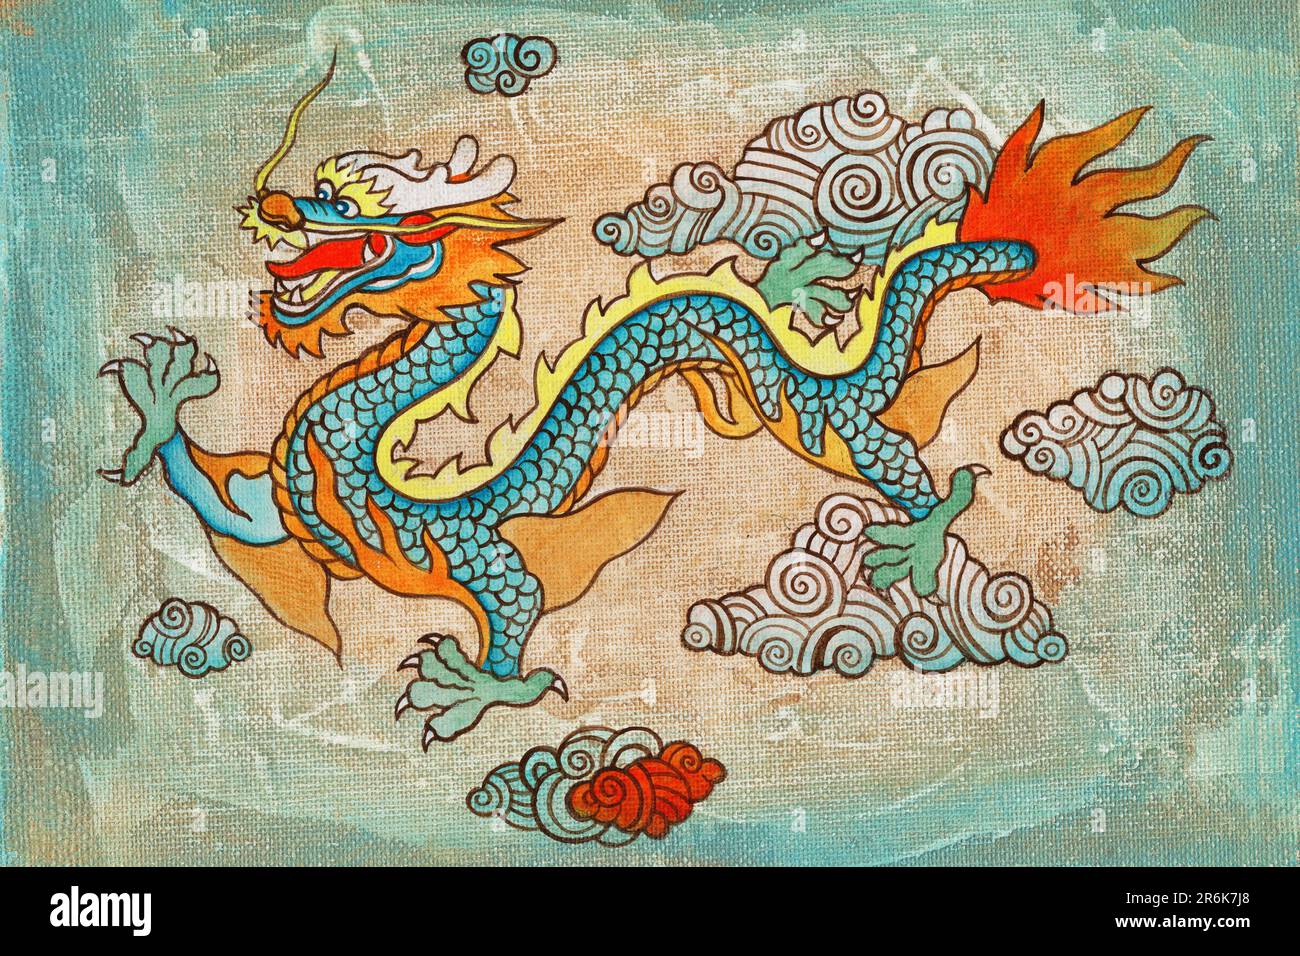 Reproduction Painting Flying Dragon Canvas Acrylic Chinese Style Stock Photo